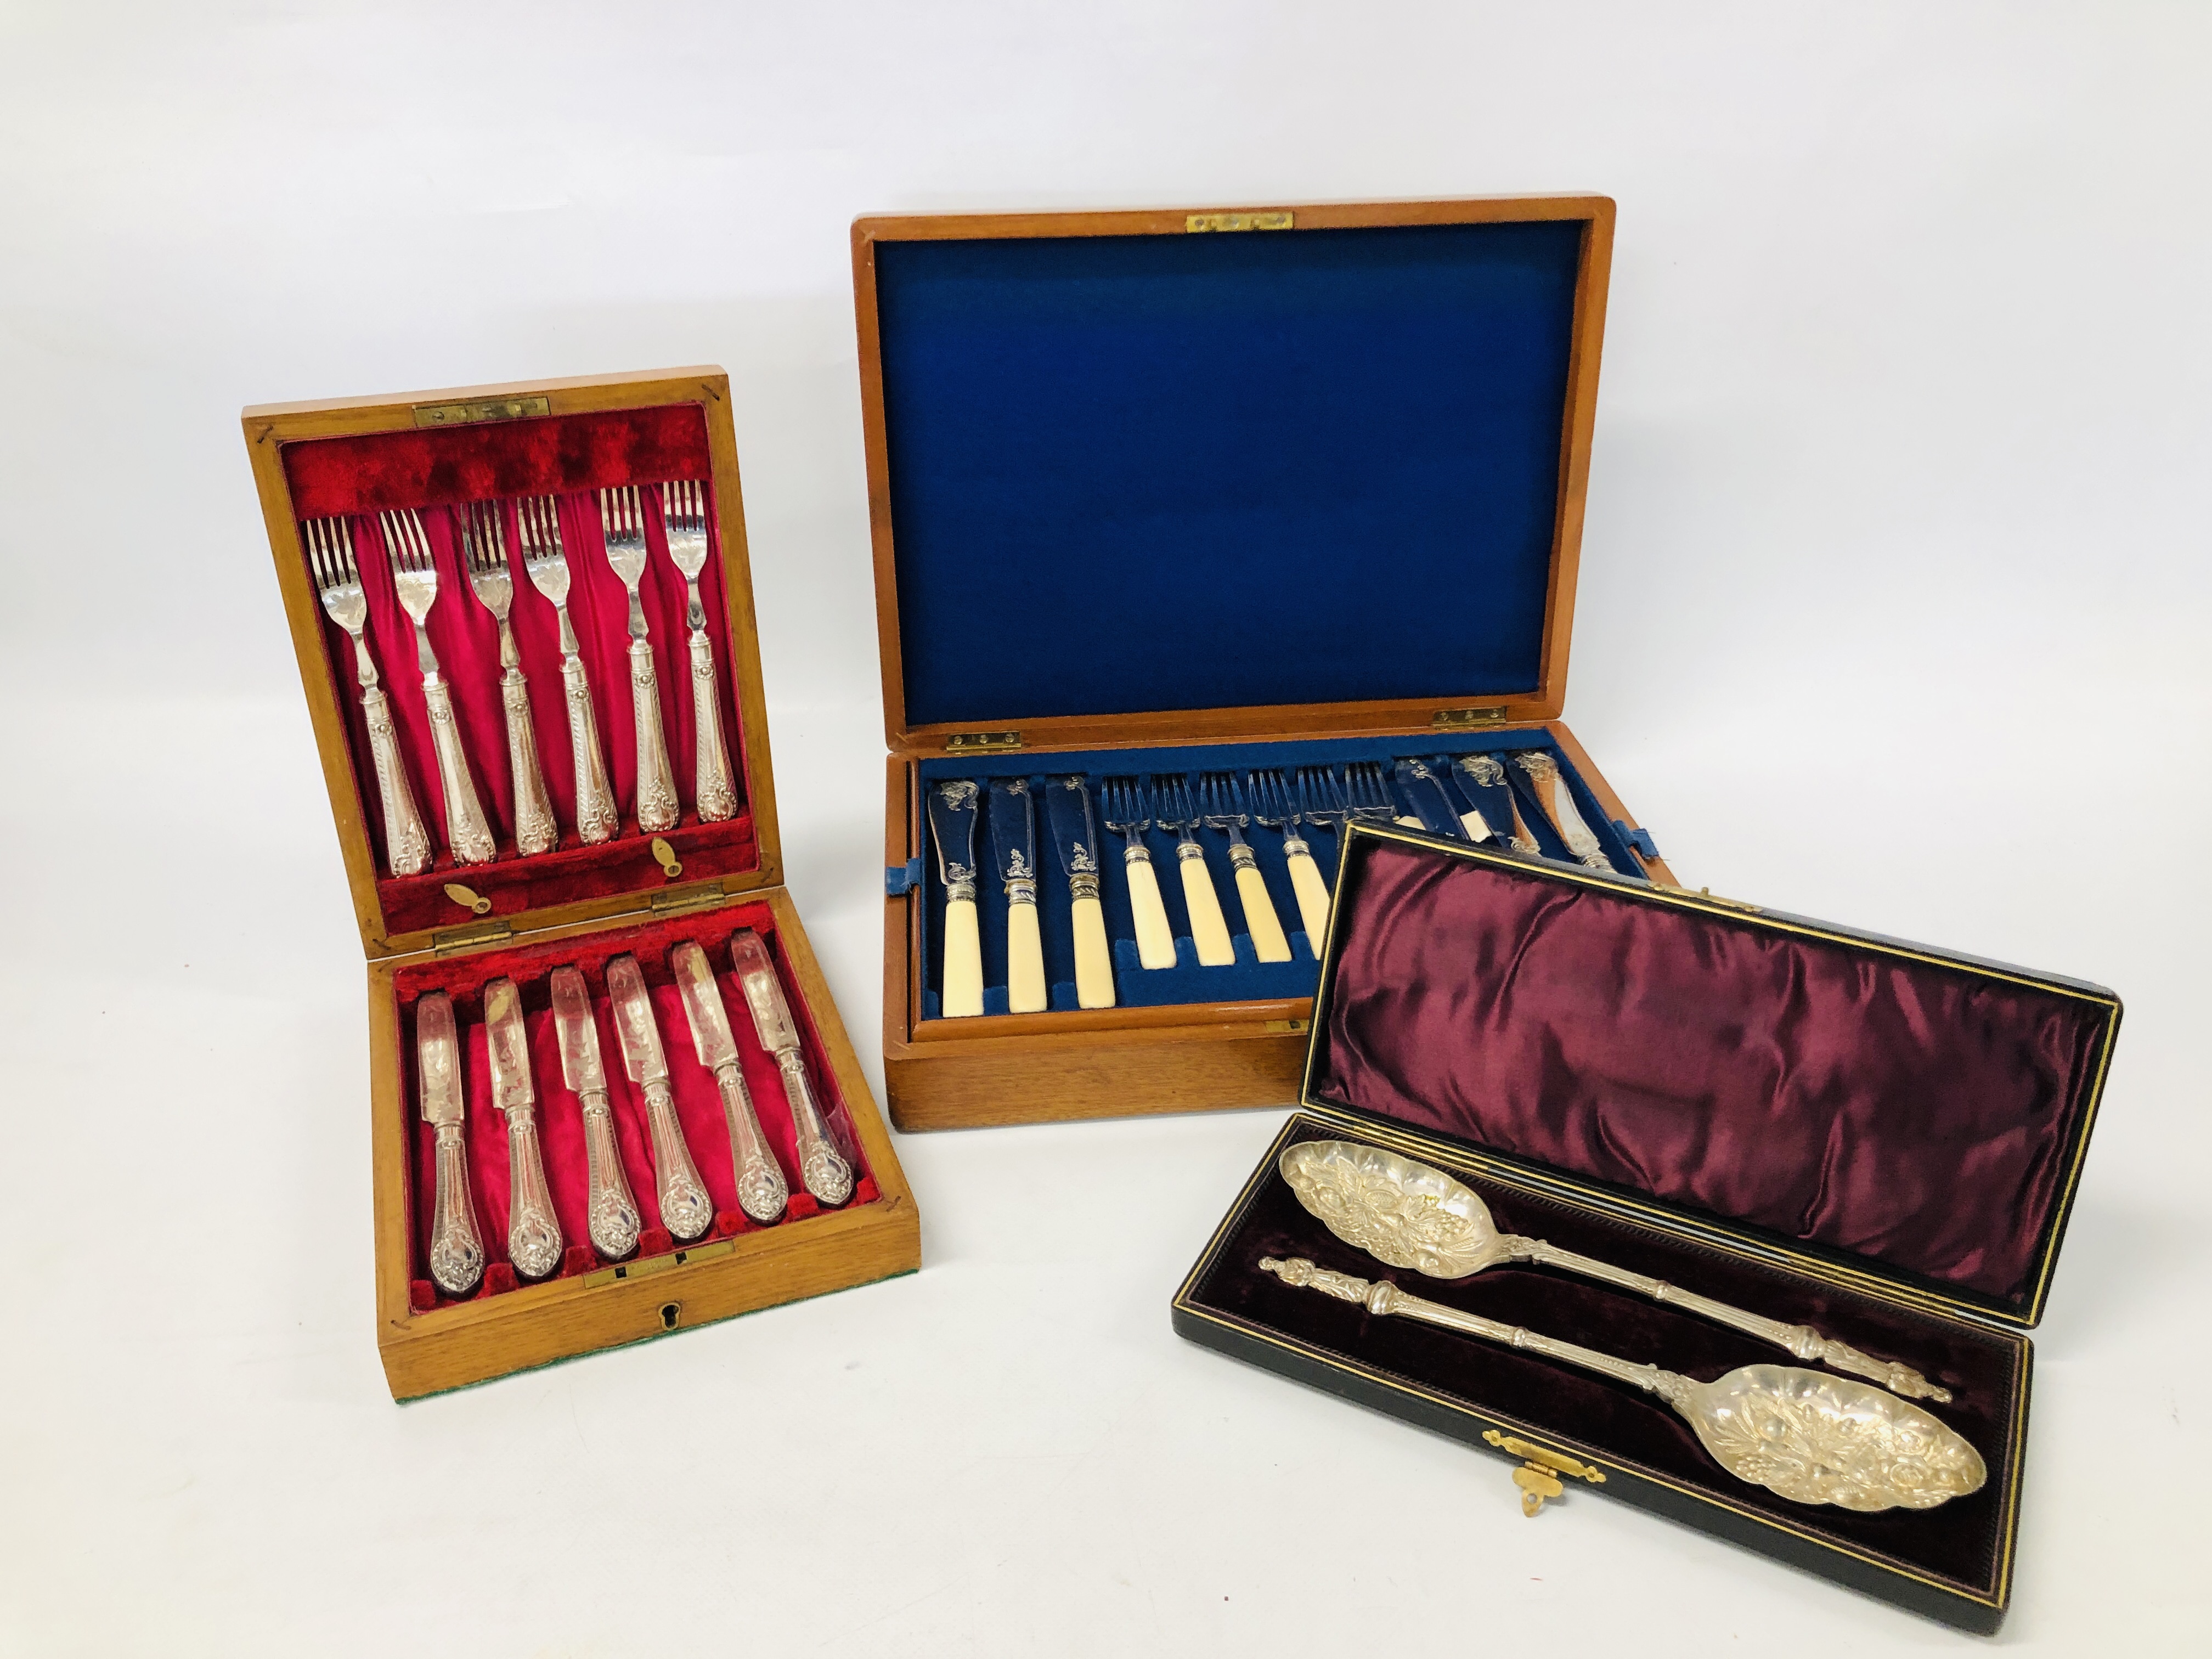 3 X CASED SETS OF VINTAGE PLATED CUTLERY TO INCLUDE A MAHOGANY CASED SET OF FISH CUTLERY.